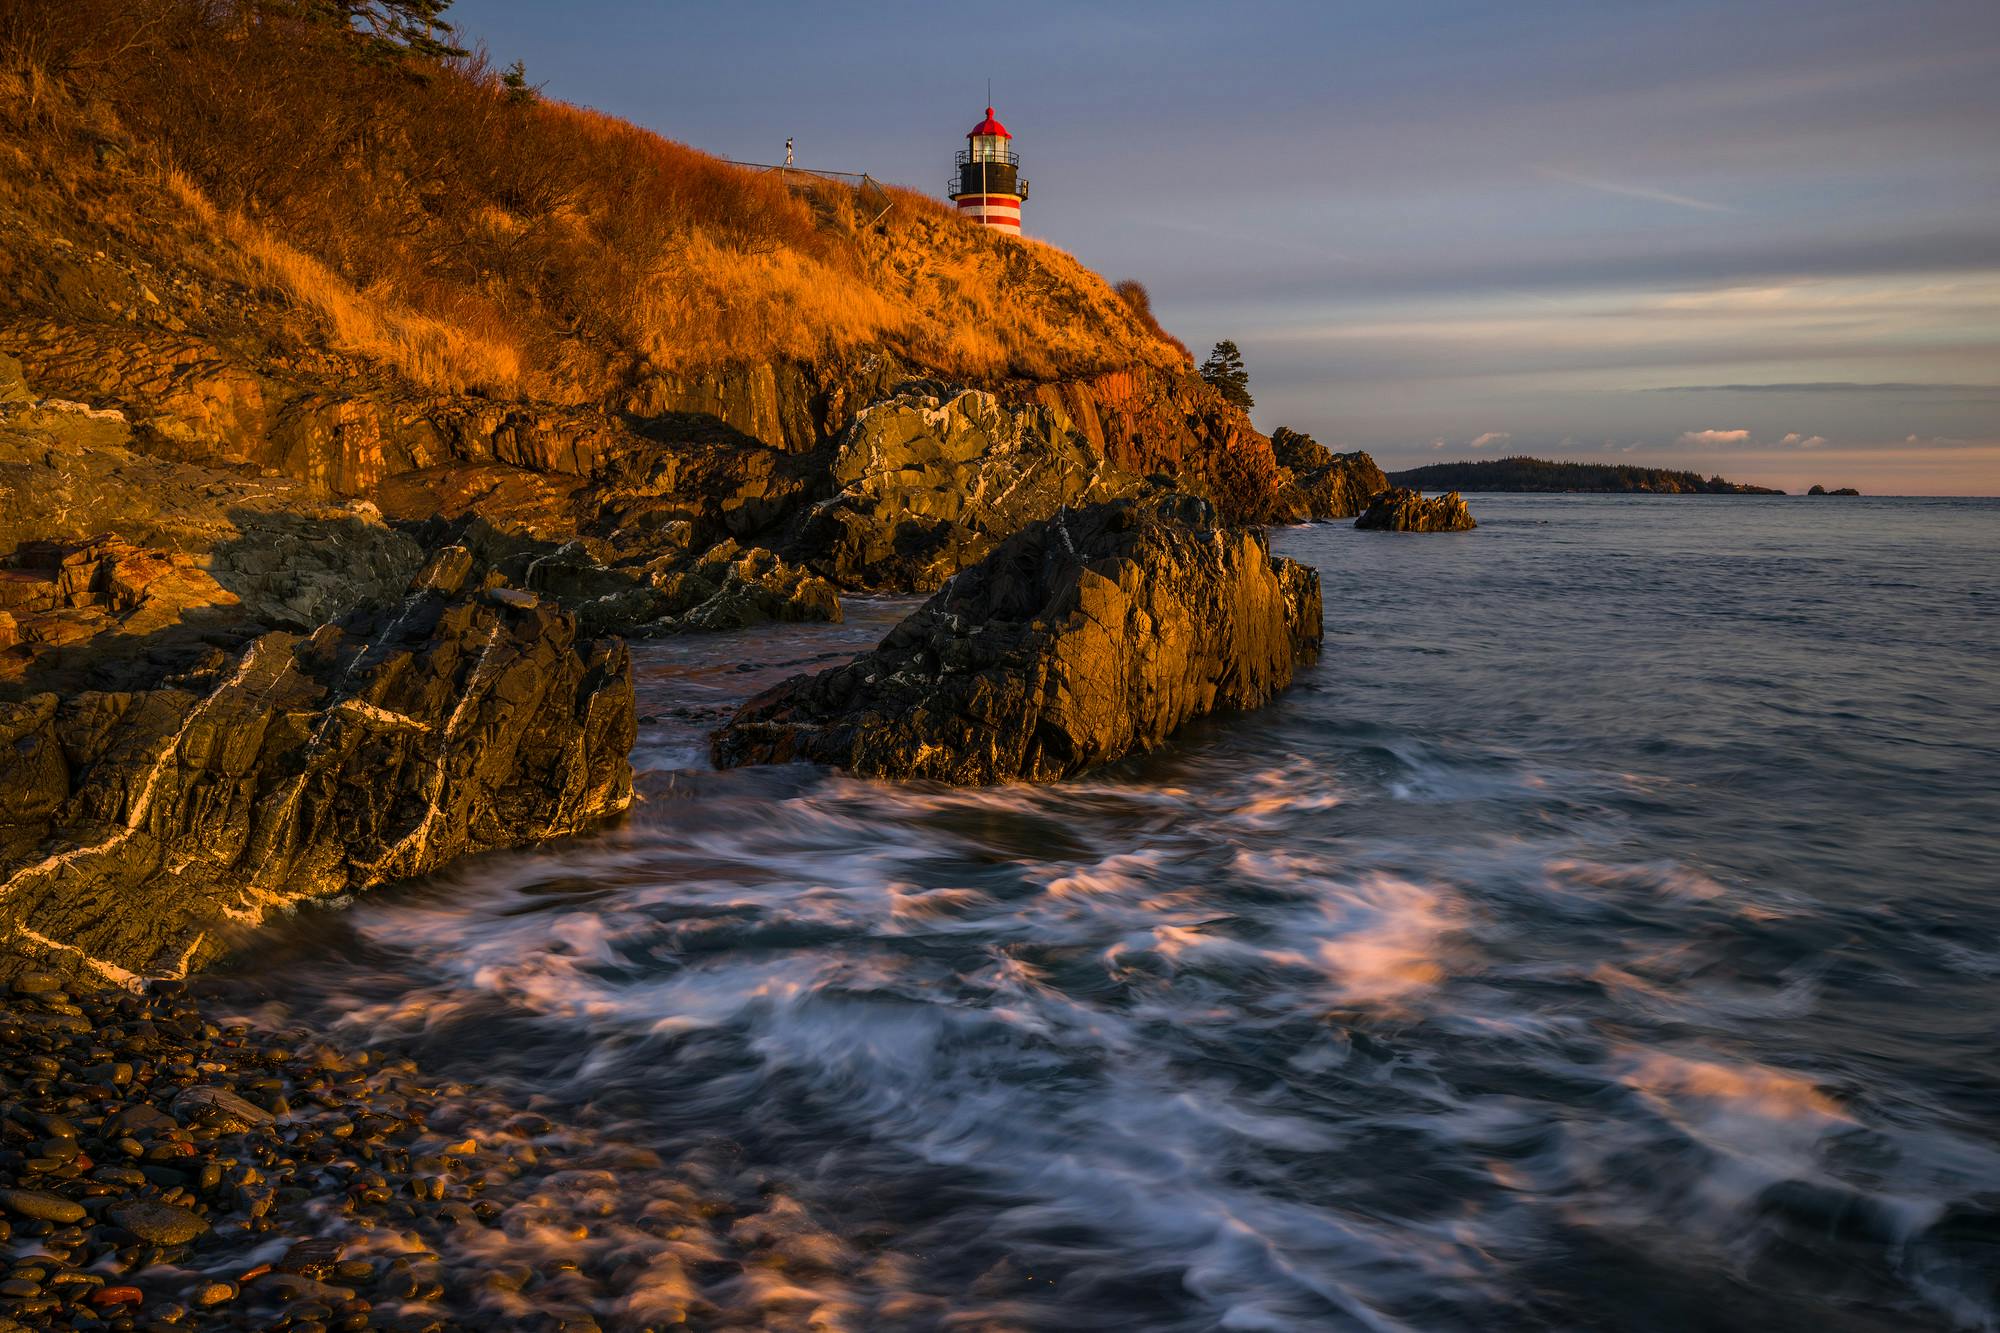 Sunrise at West Quoddy Head Lighthouse